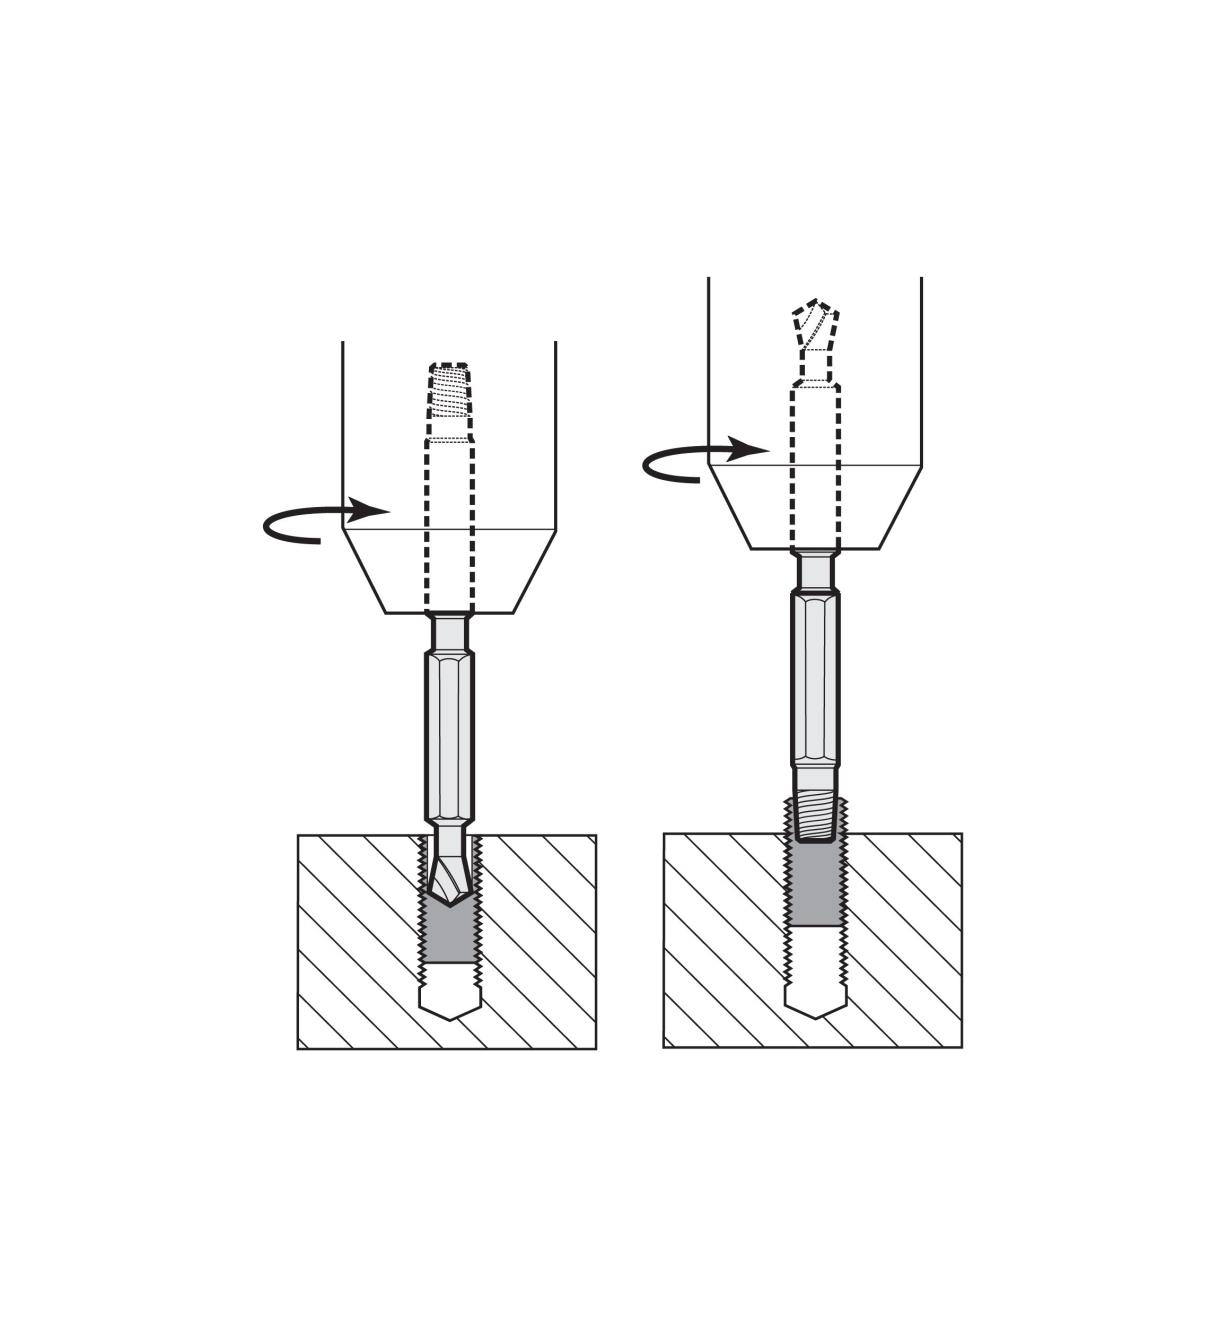 Cutaway illustrations showing how the product extracts a bolt or screw